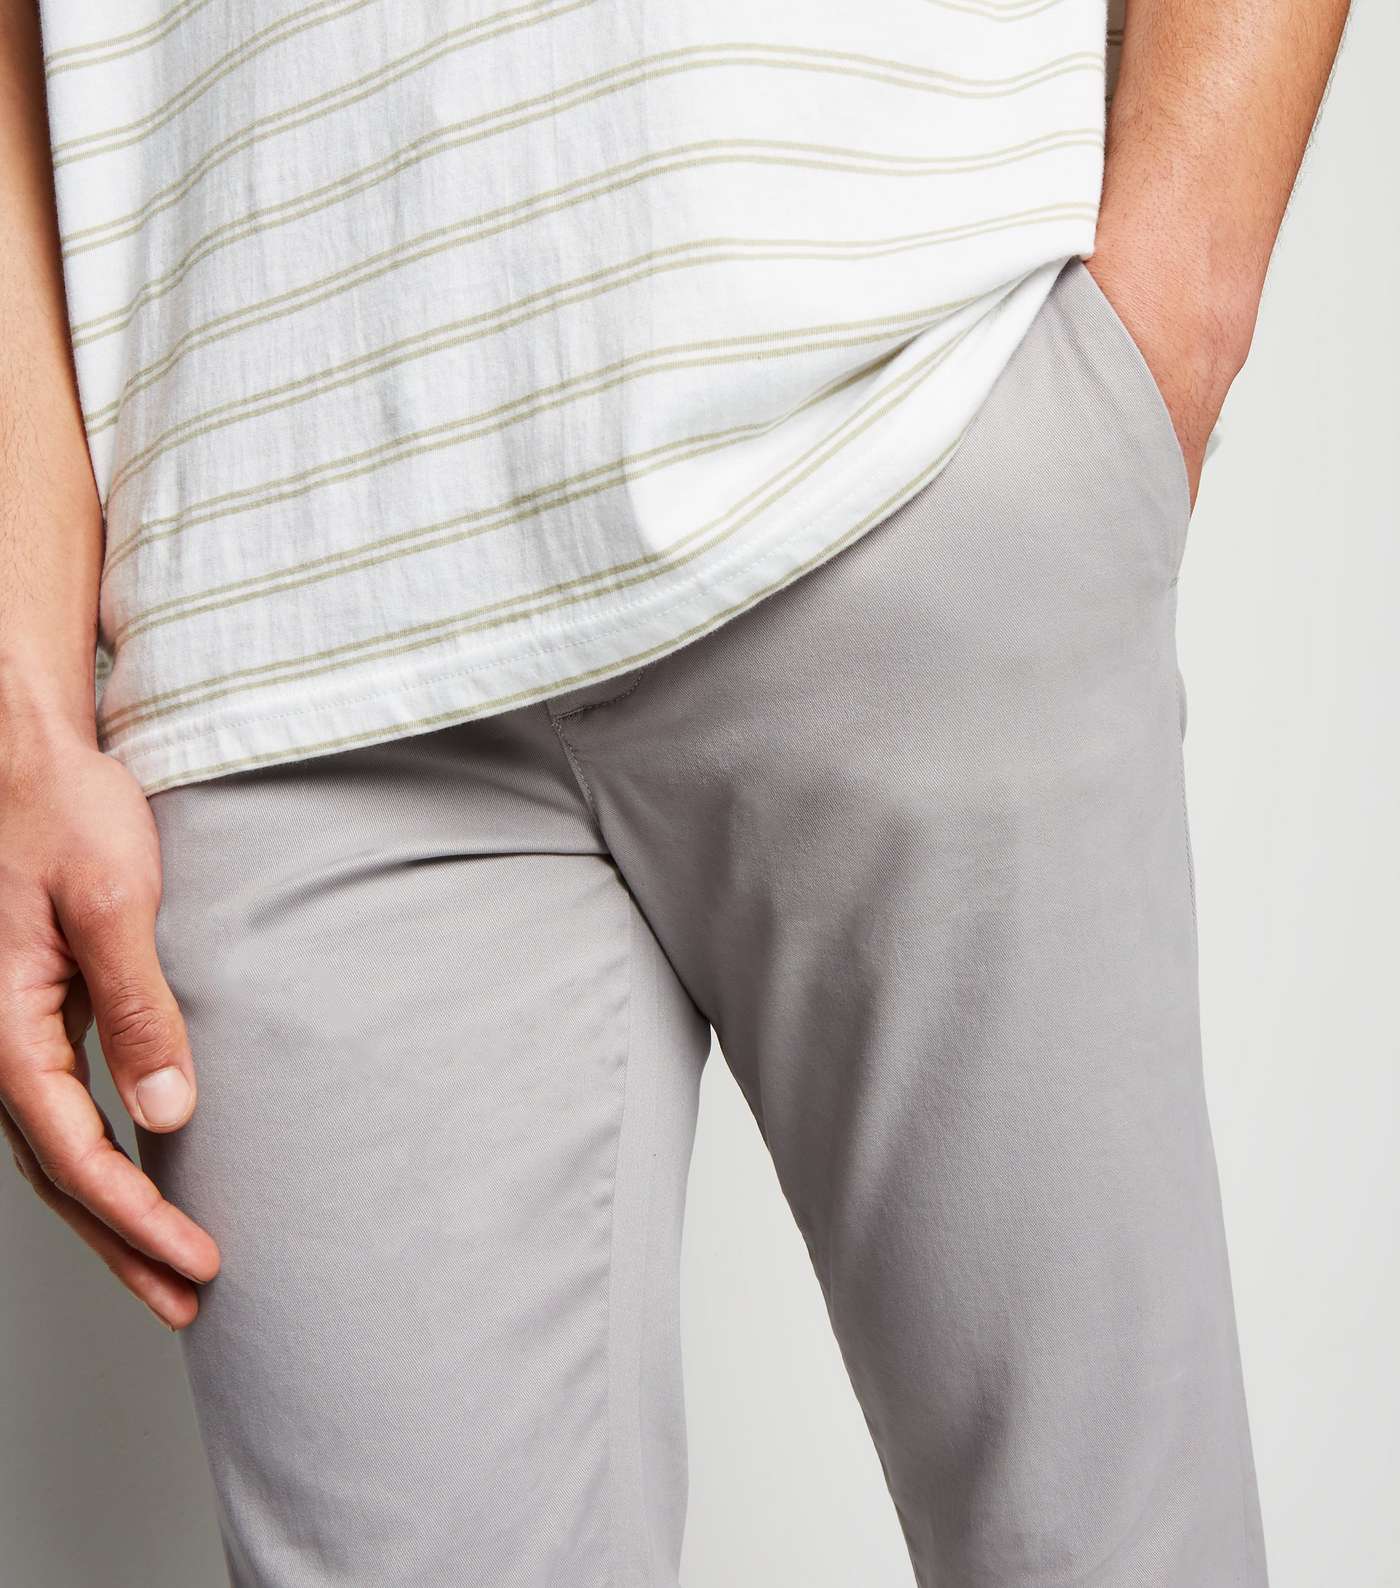 Pale Grey Cotton Blend Skinny Chinos Image 4